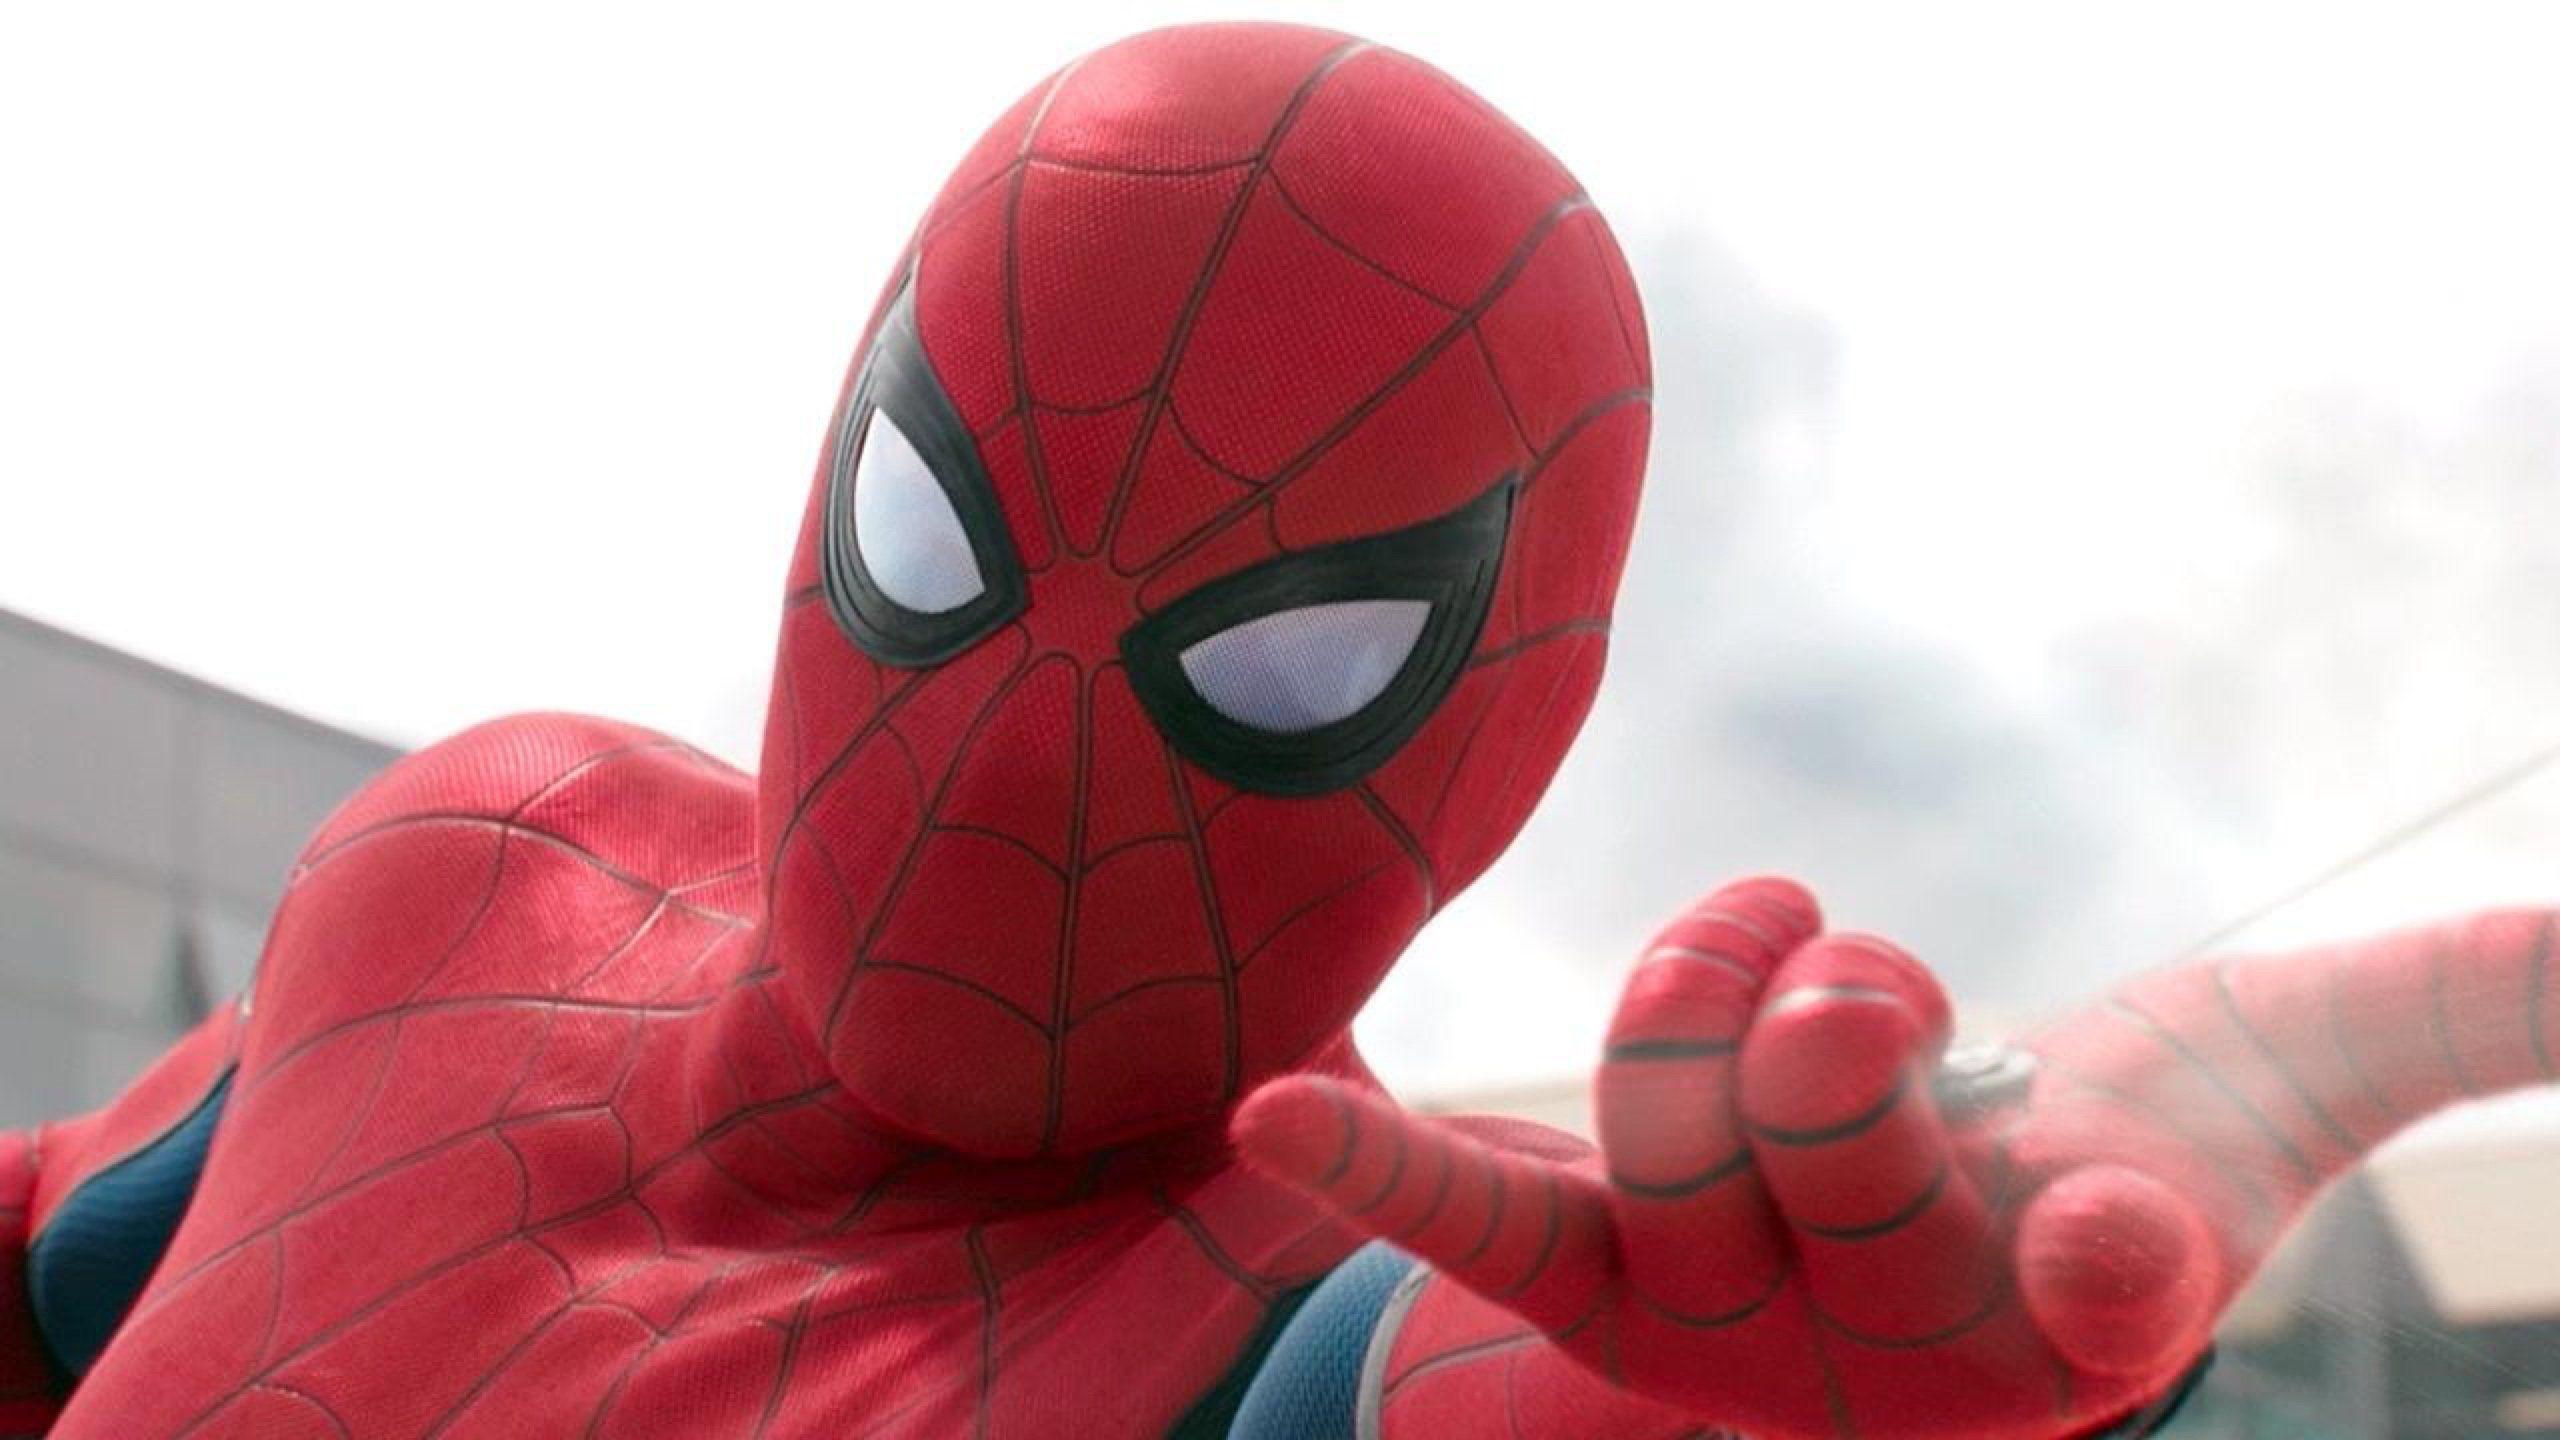 An Image Of Spider Man's 'Avengers: Infinity War' Costume Has Leaked